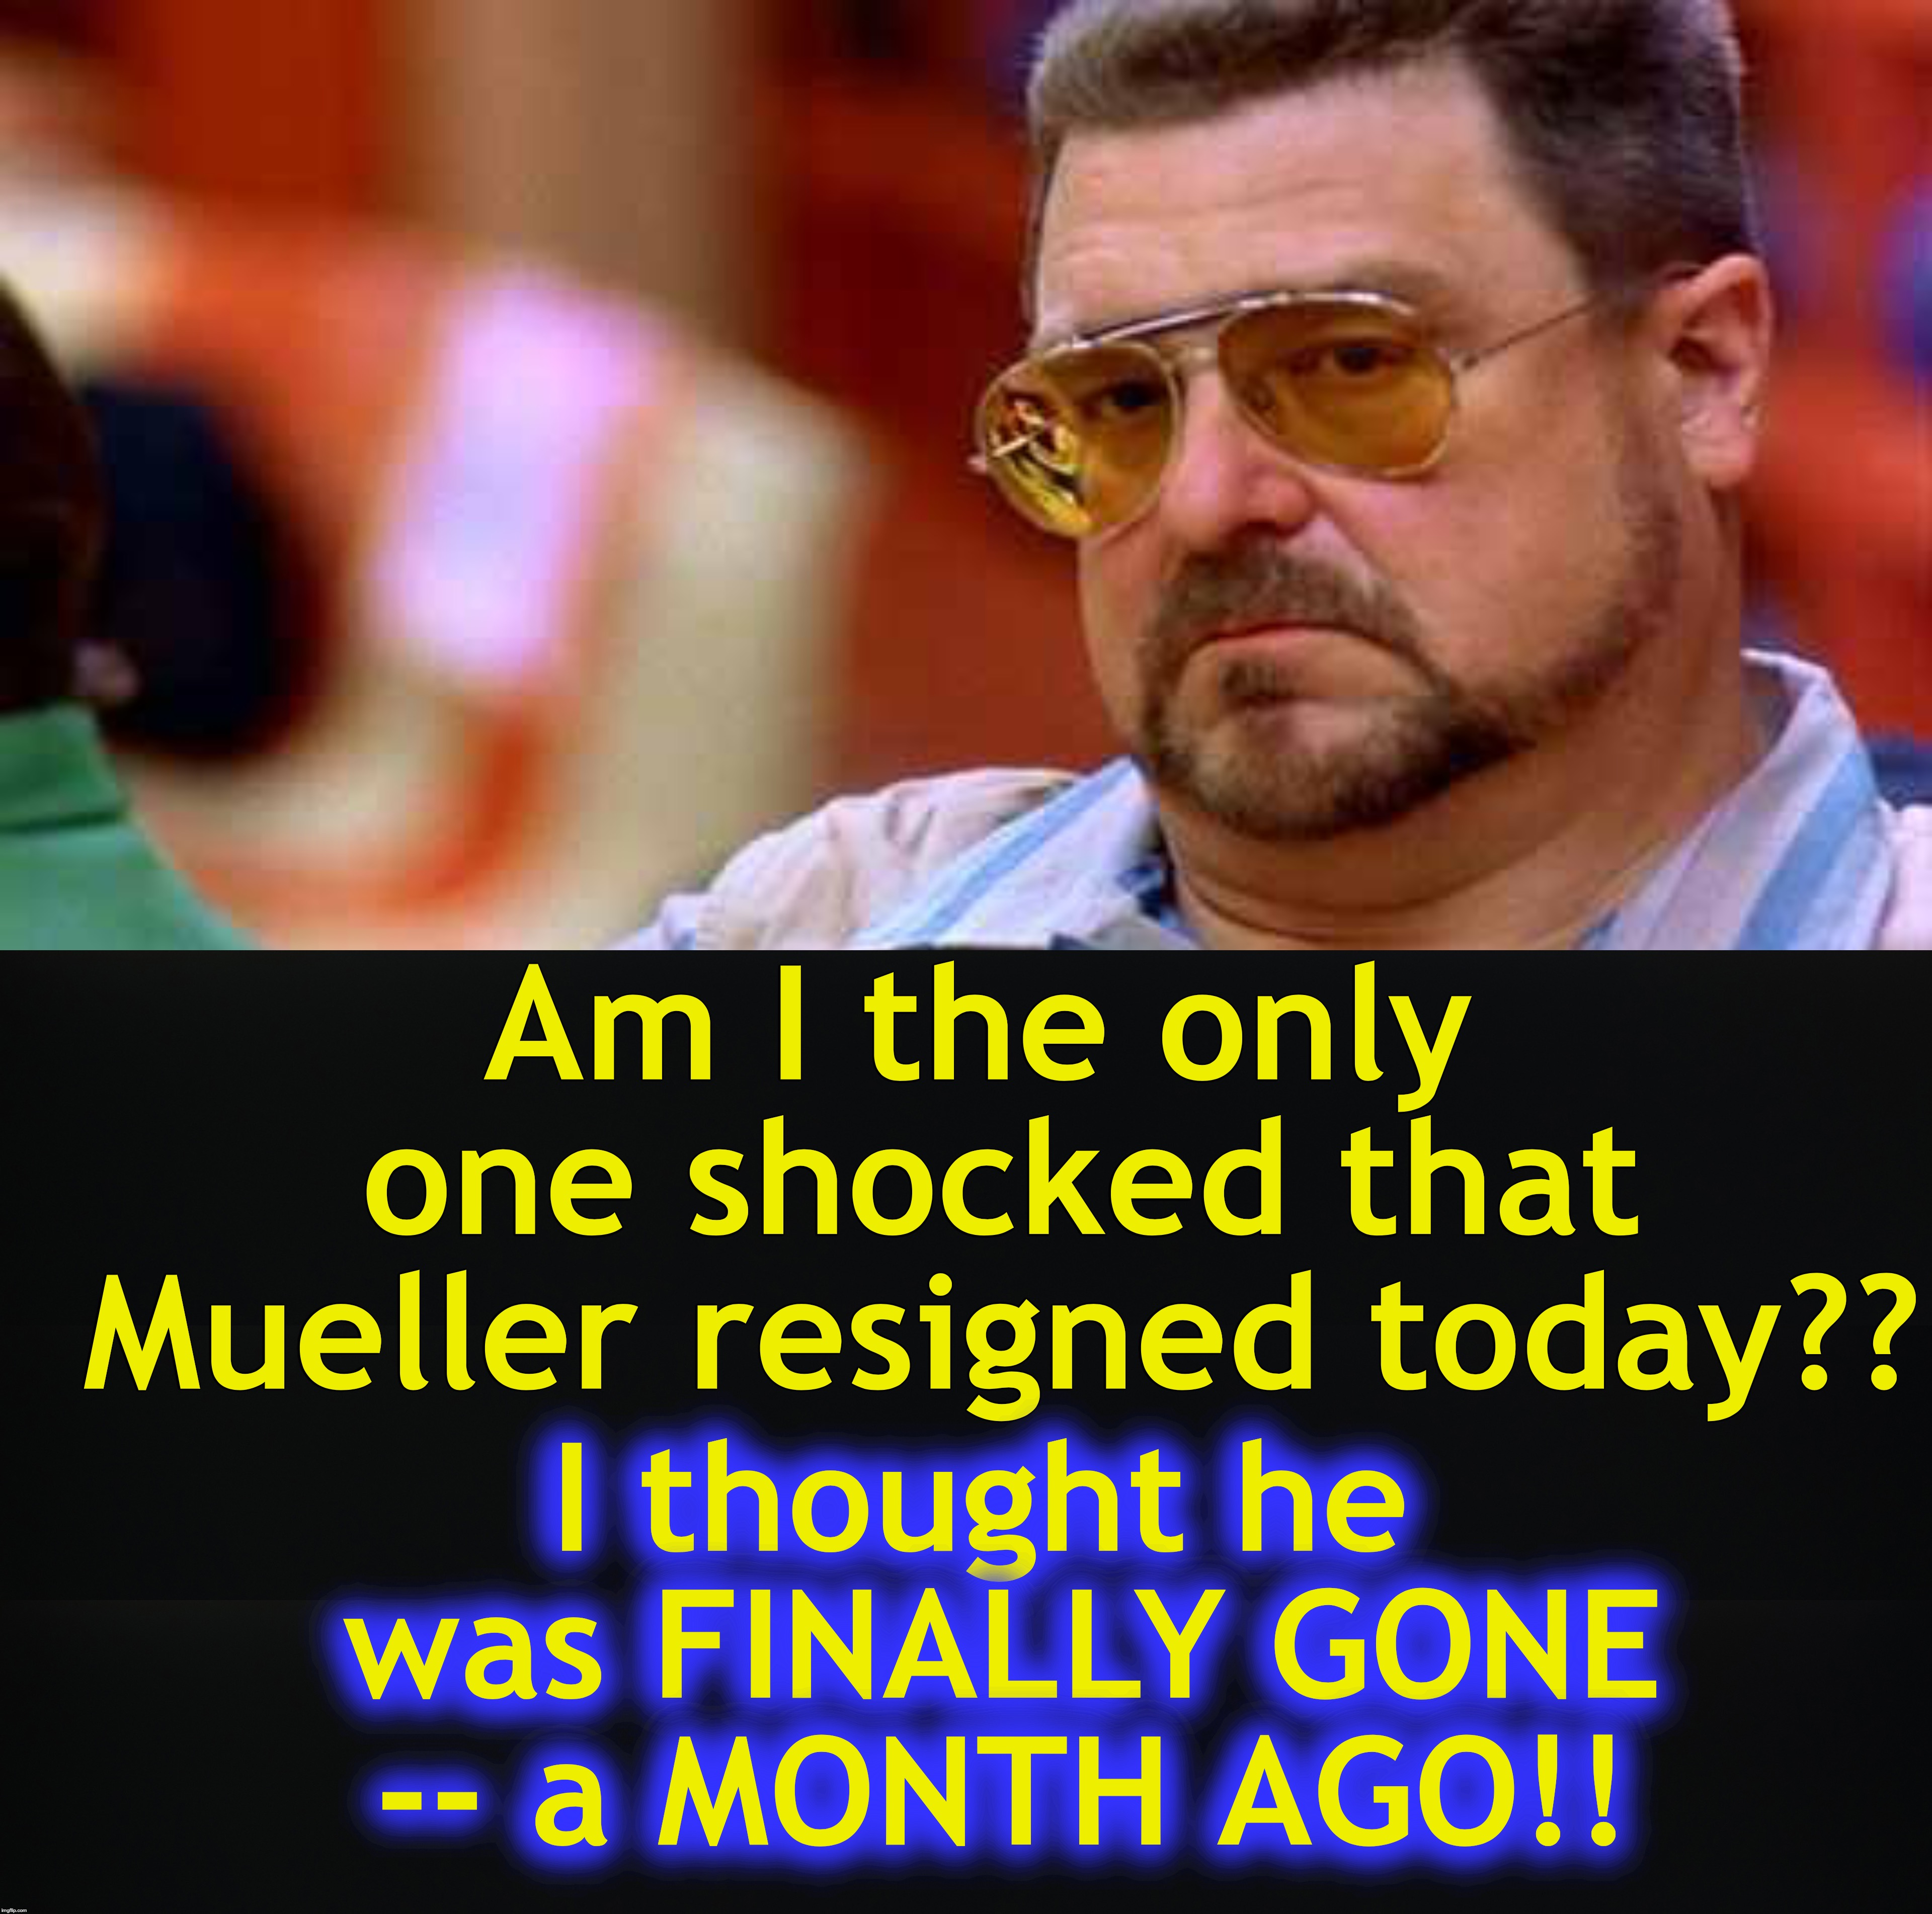 Am I the only one shocked that Mueller resigned today?? I thought he was FINALLY GONE -- a MONTH AGO!! | image tagged in walter the big lebowski | made w/ Imgflip meme maker